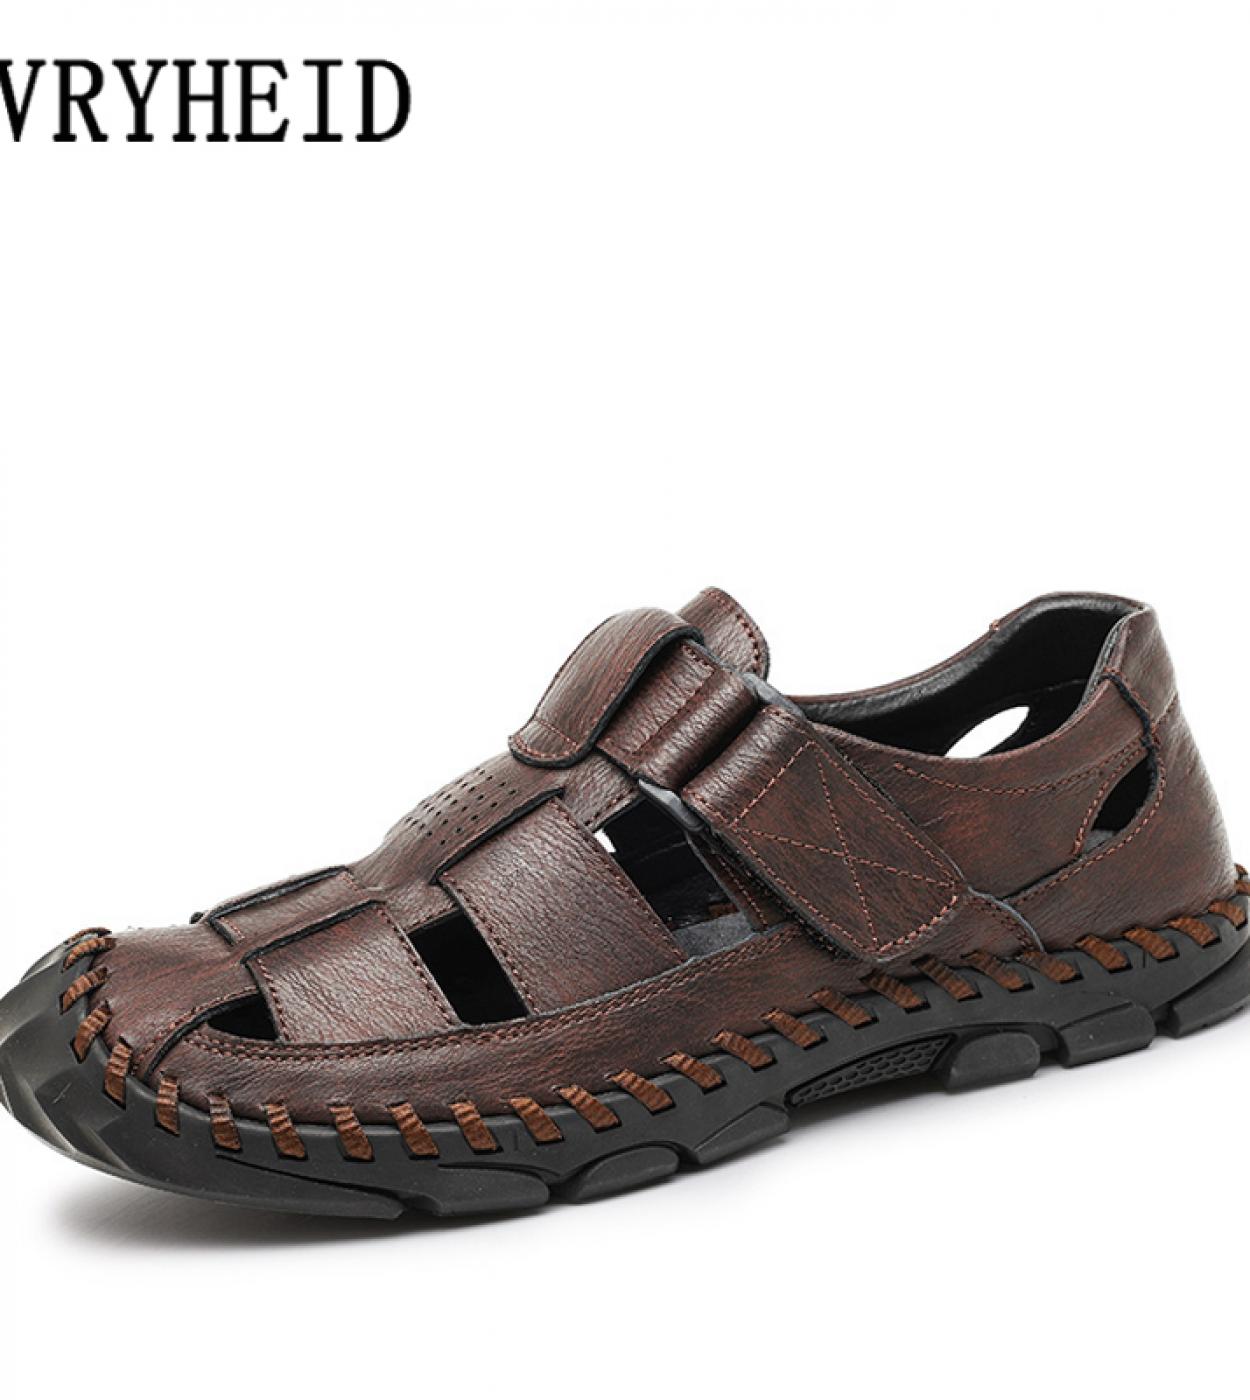 Vryheid Genuine Leather Mens Sandals Fretwork Breathable Fisherman Shoes Style Retro Gladiator Summer Outdoors Beach Si